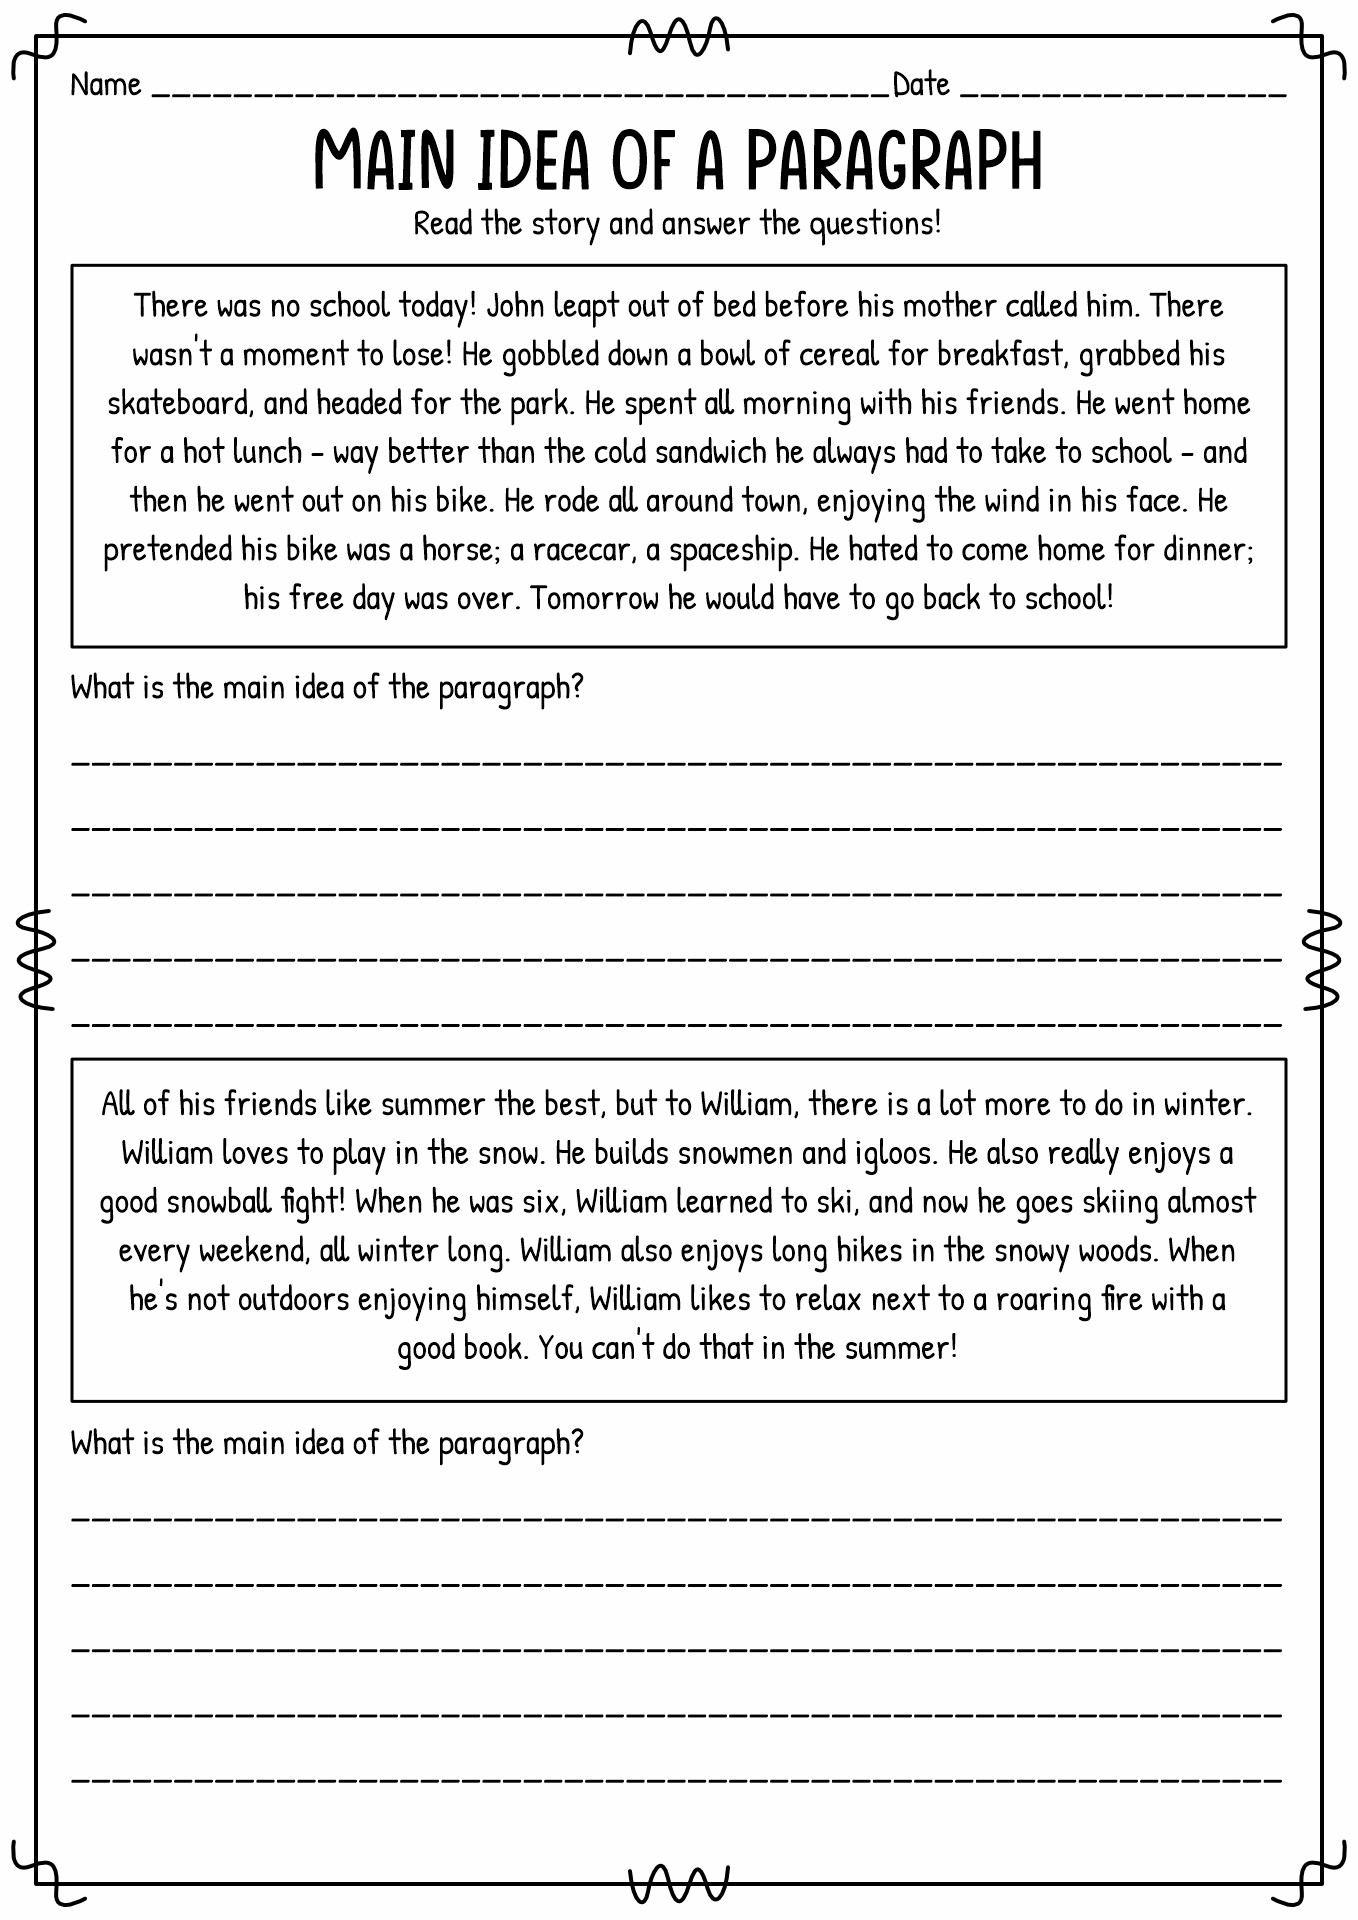 14 Best Images of Main Idea Worksheets Grade 5 - Main Idea and Details